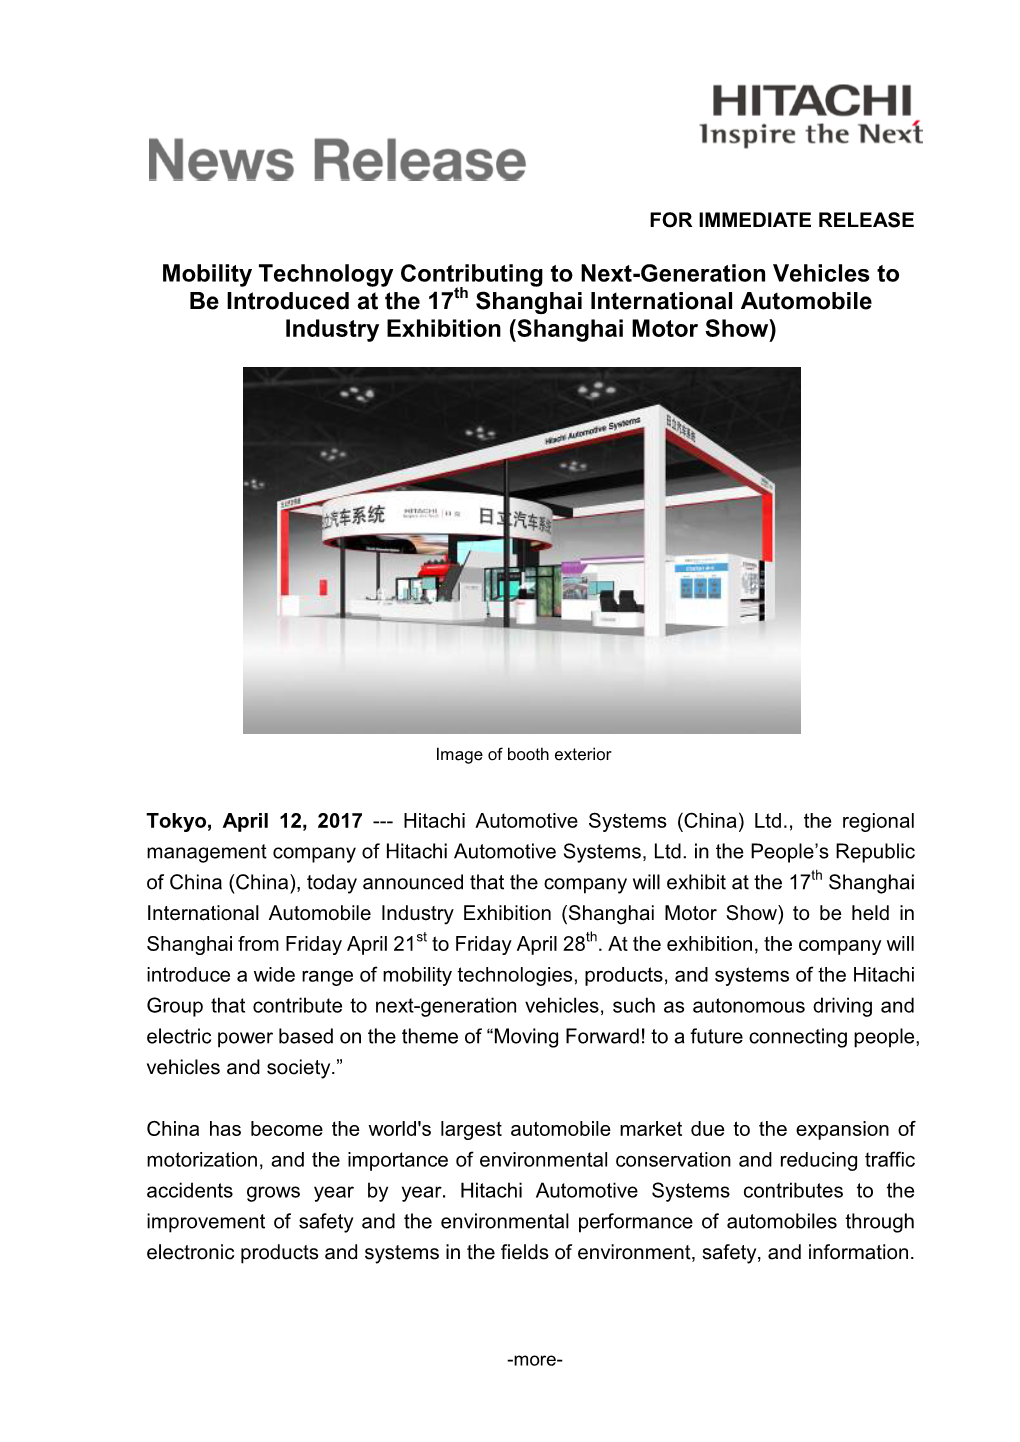 Mobility Technology Contributing to Next-Generation Vehicles to Be Introduced at the 17Th Shanghai International Automobile Industry Exhibition (Shanghai Motor Show)